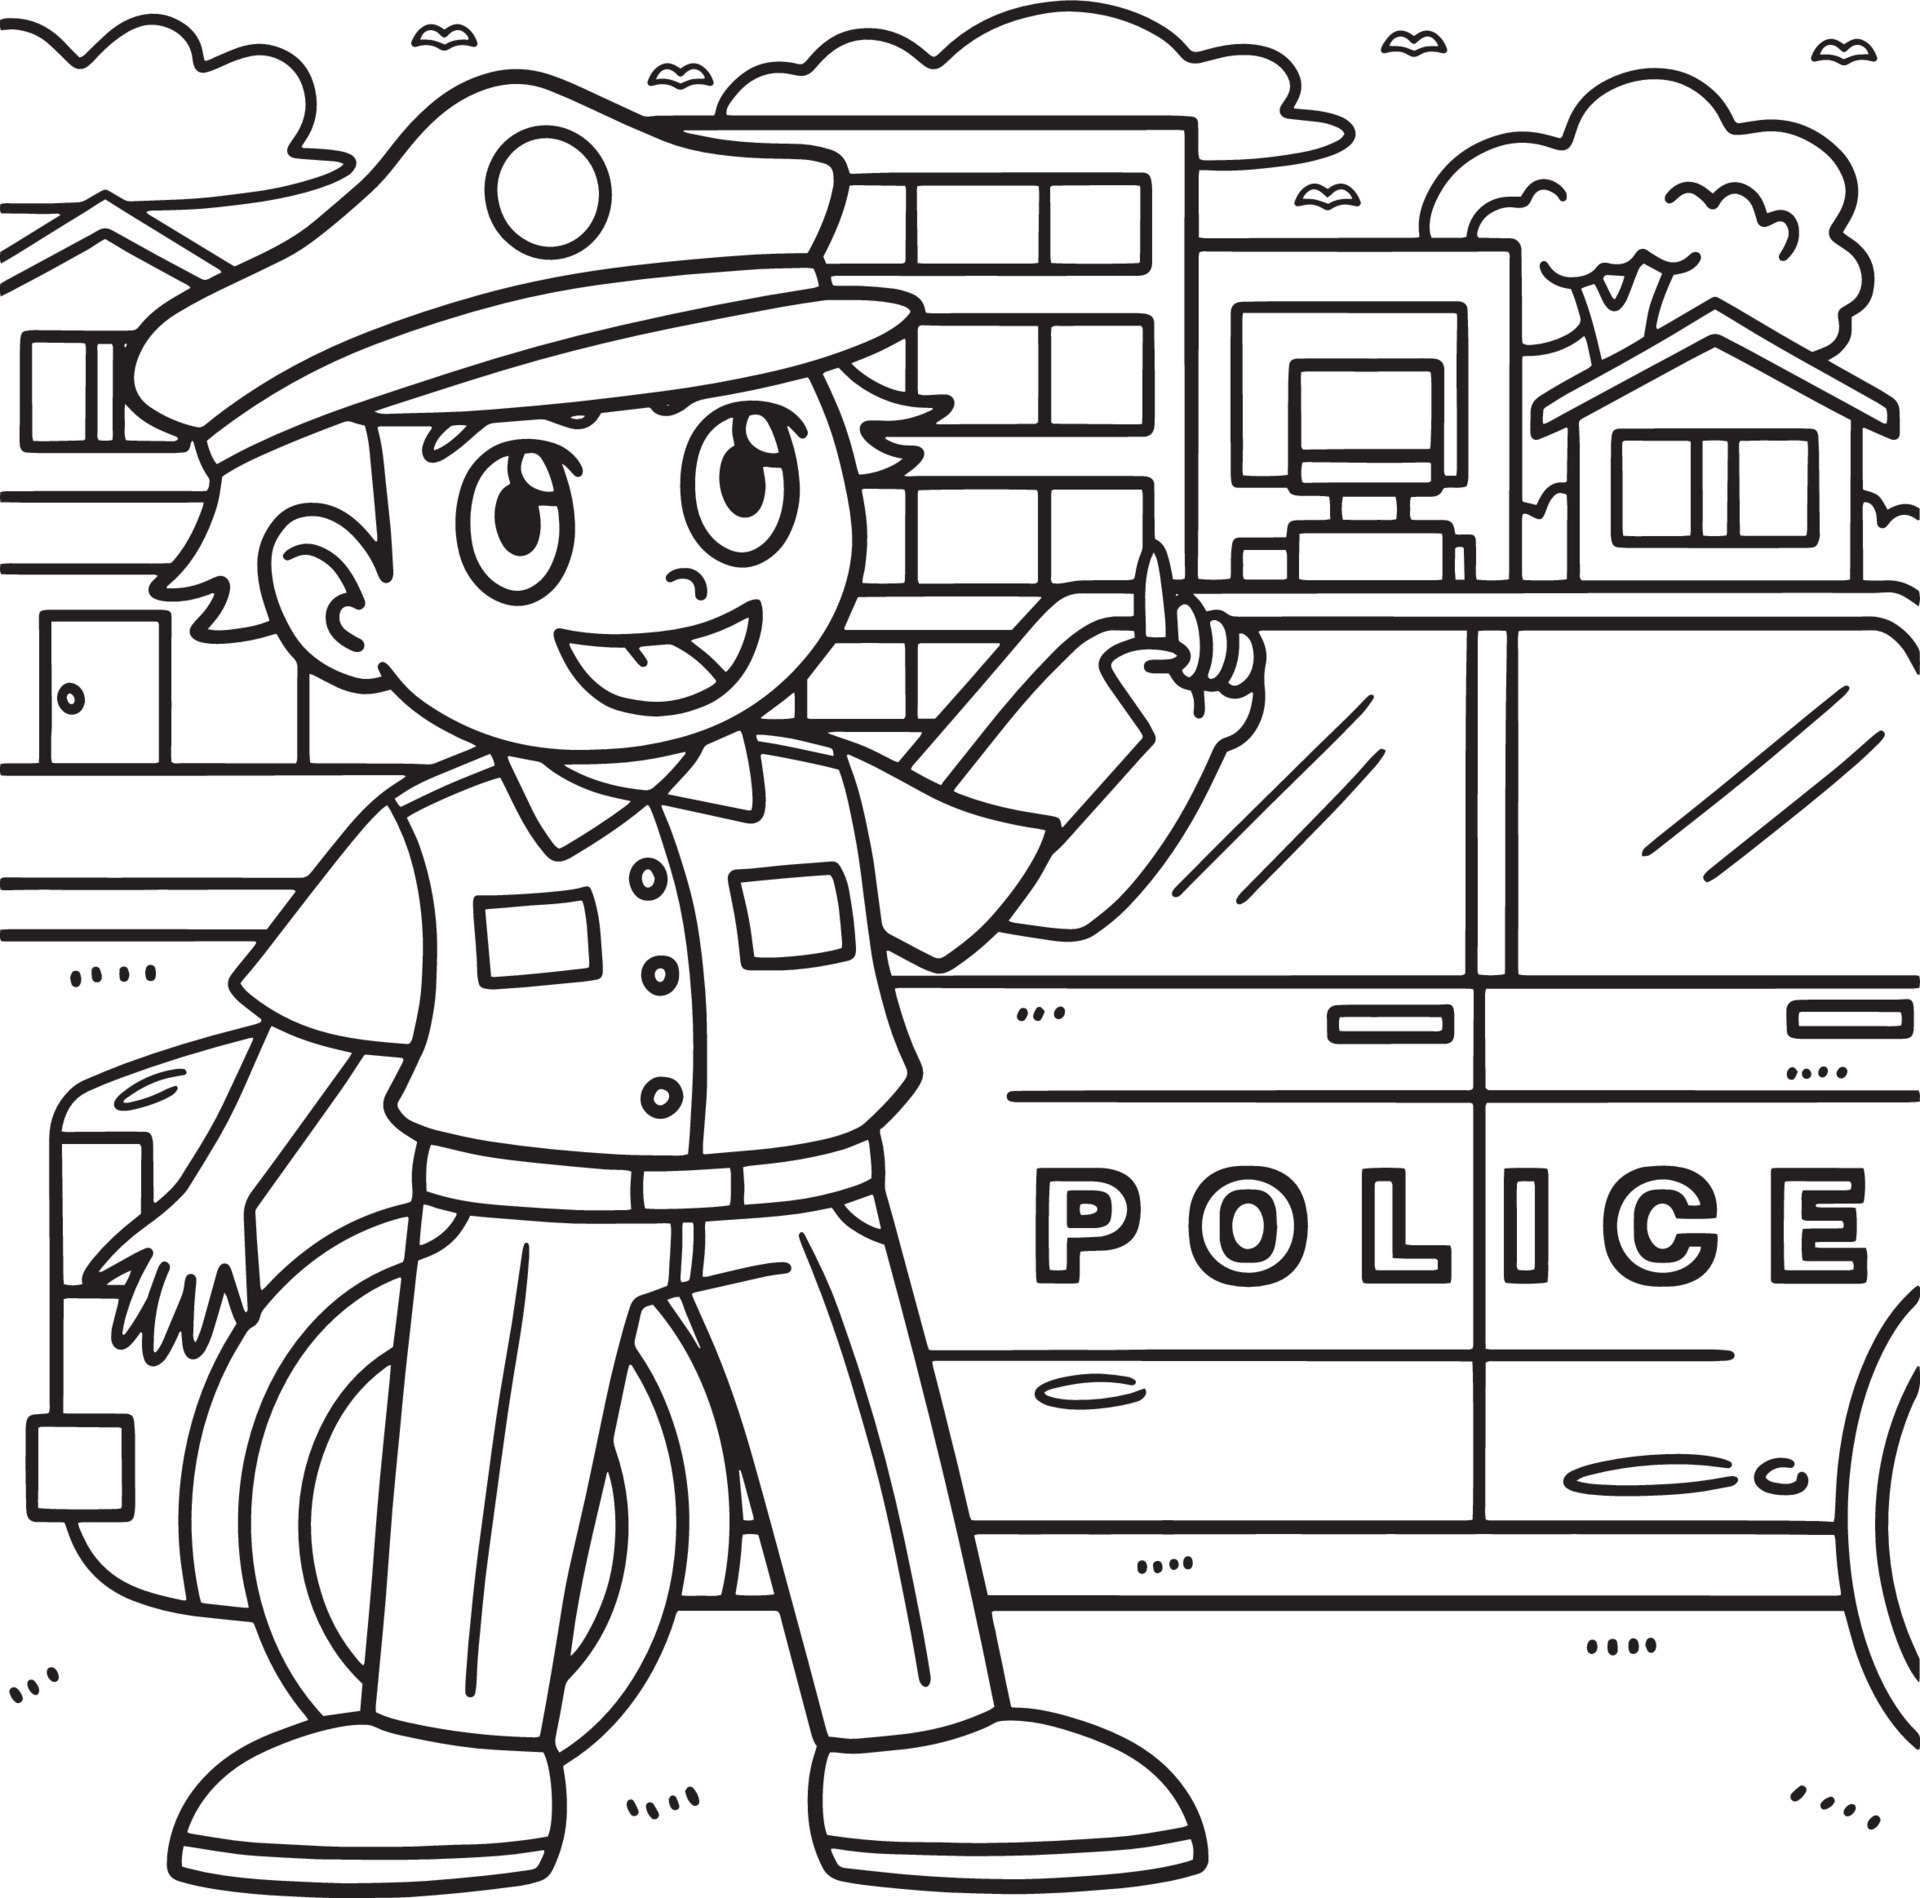 https://static.vecteezy.com/system/resources/previews/012/902/430/original/policeman-coloring-page-for-kids-free-vector.jpg